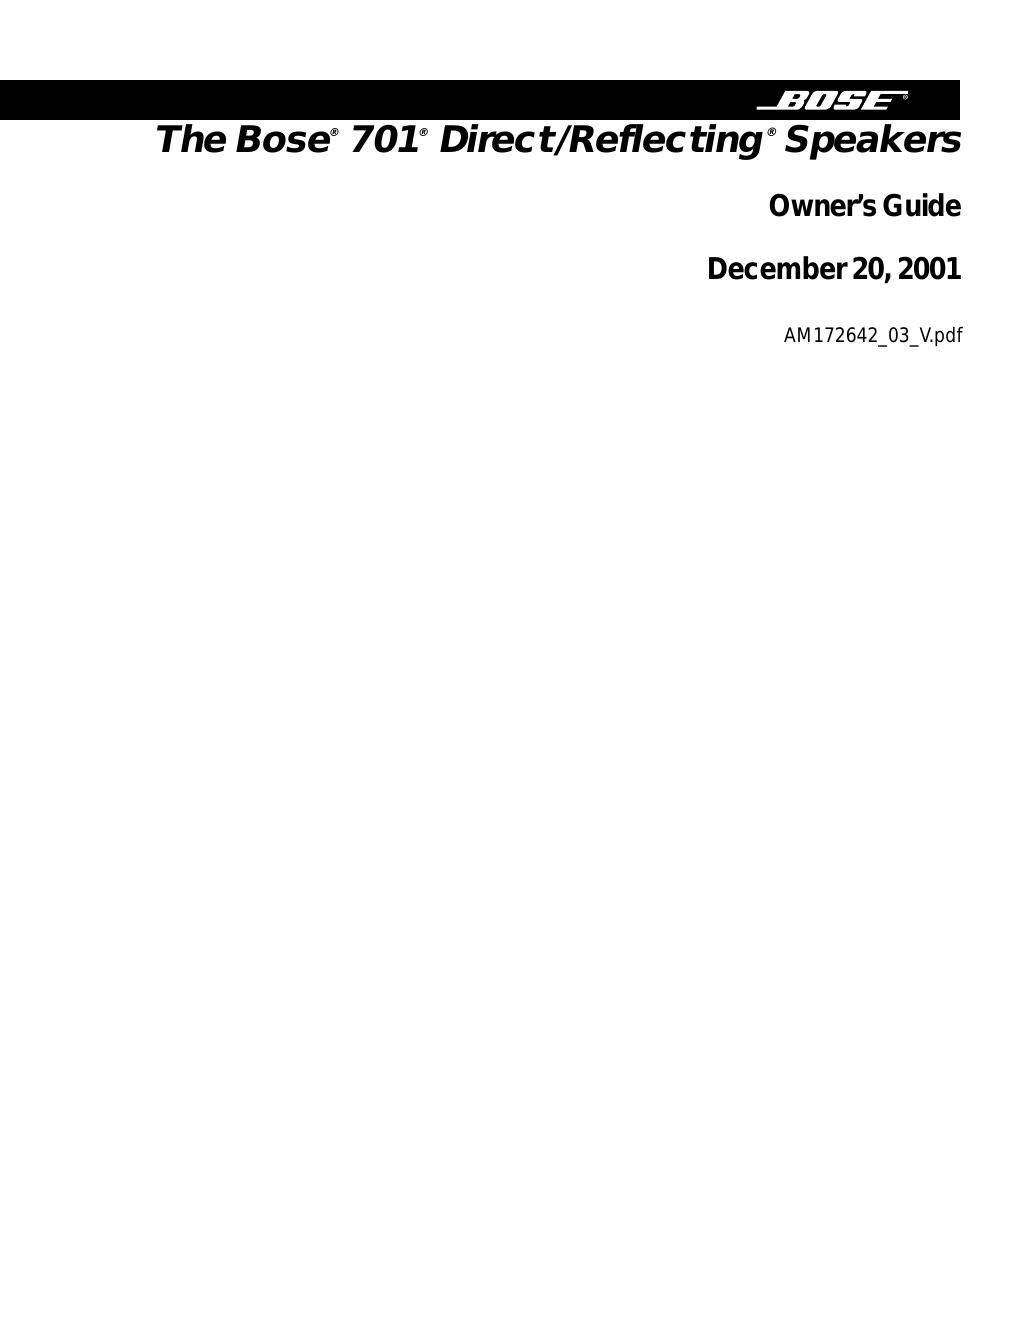 bose 701 owners guide